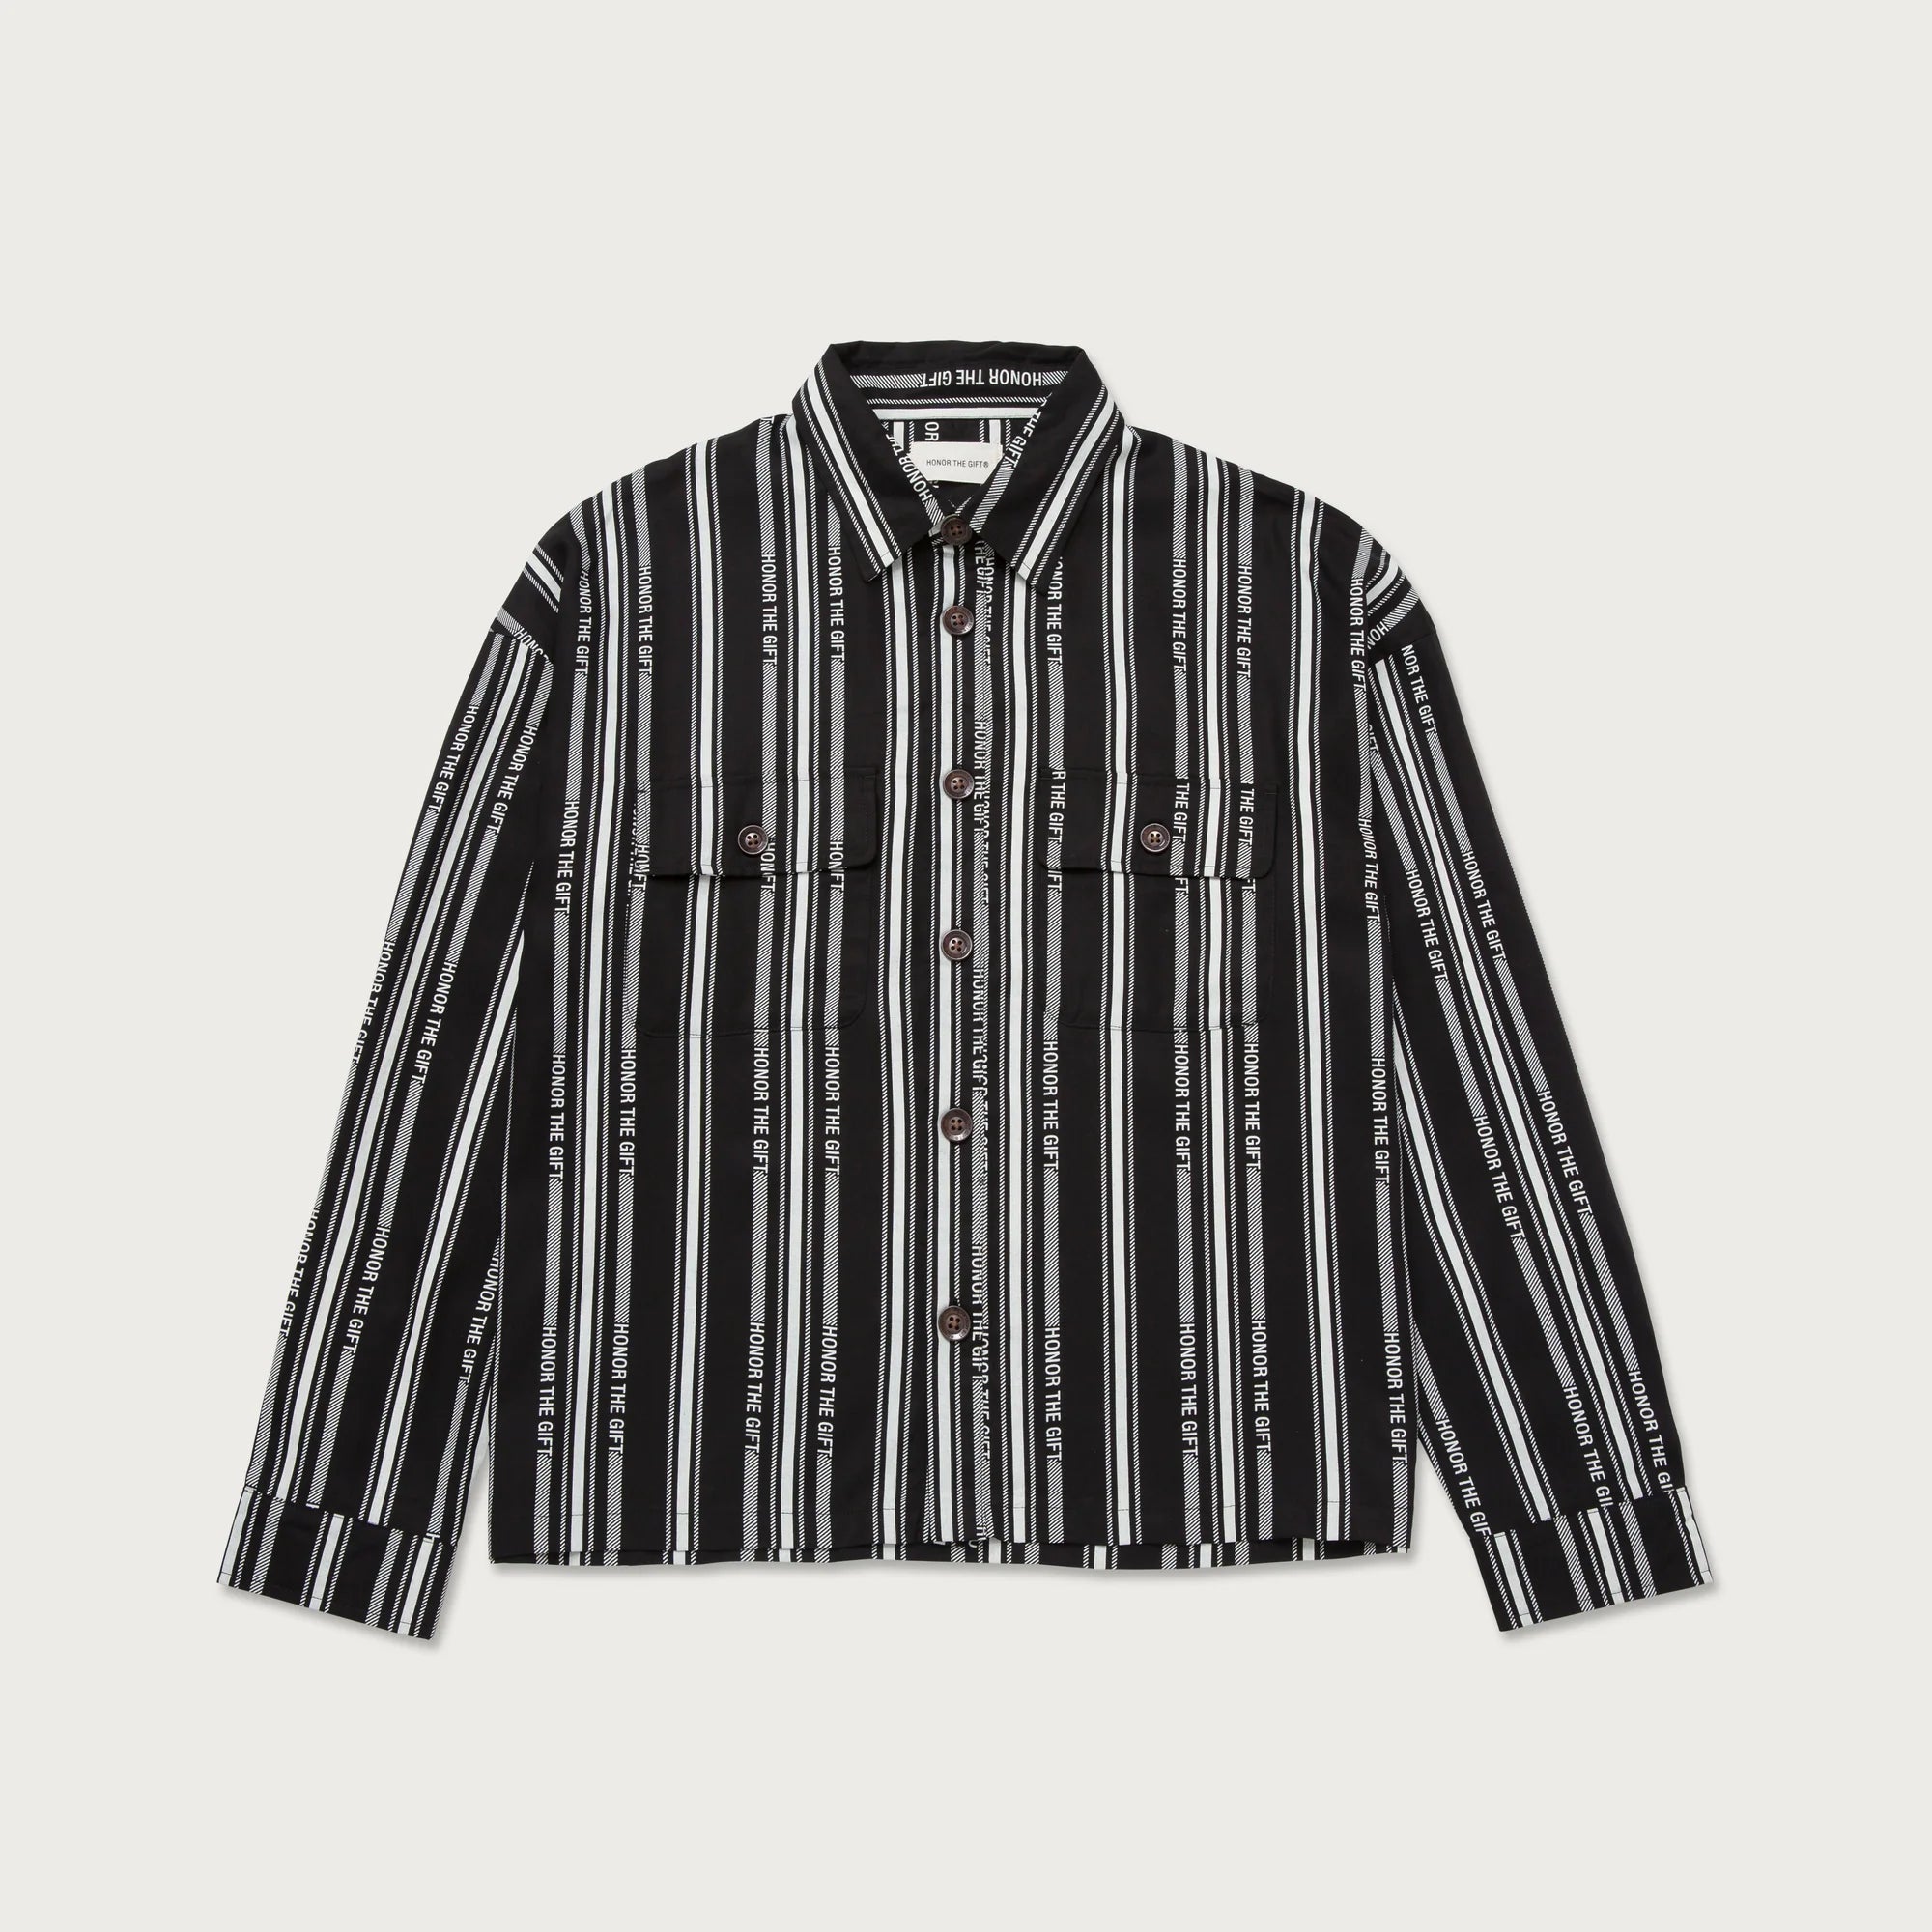 HONOR STRIPE BUTTON UP